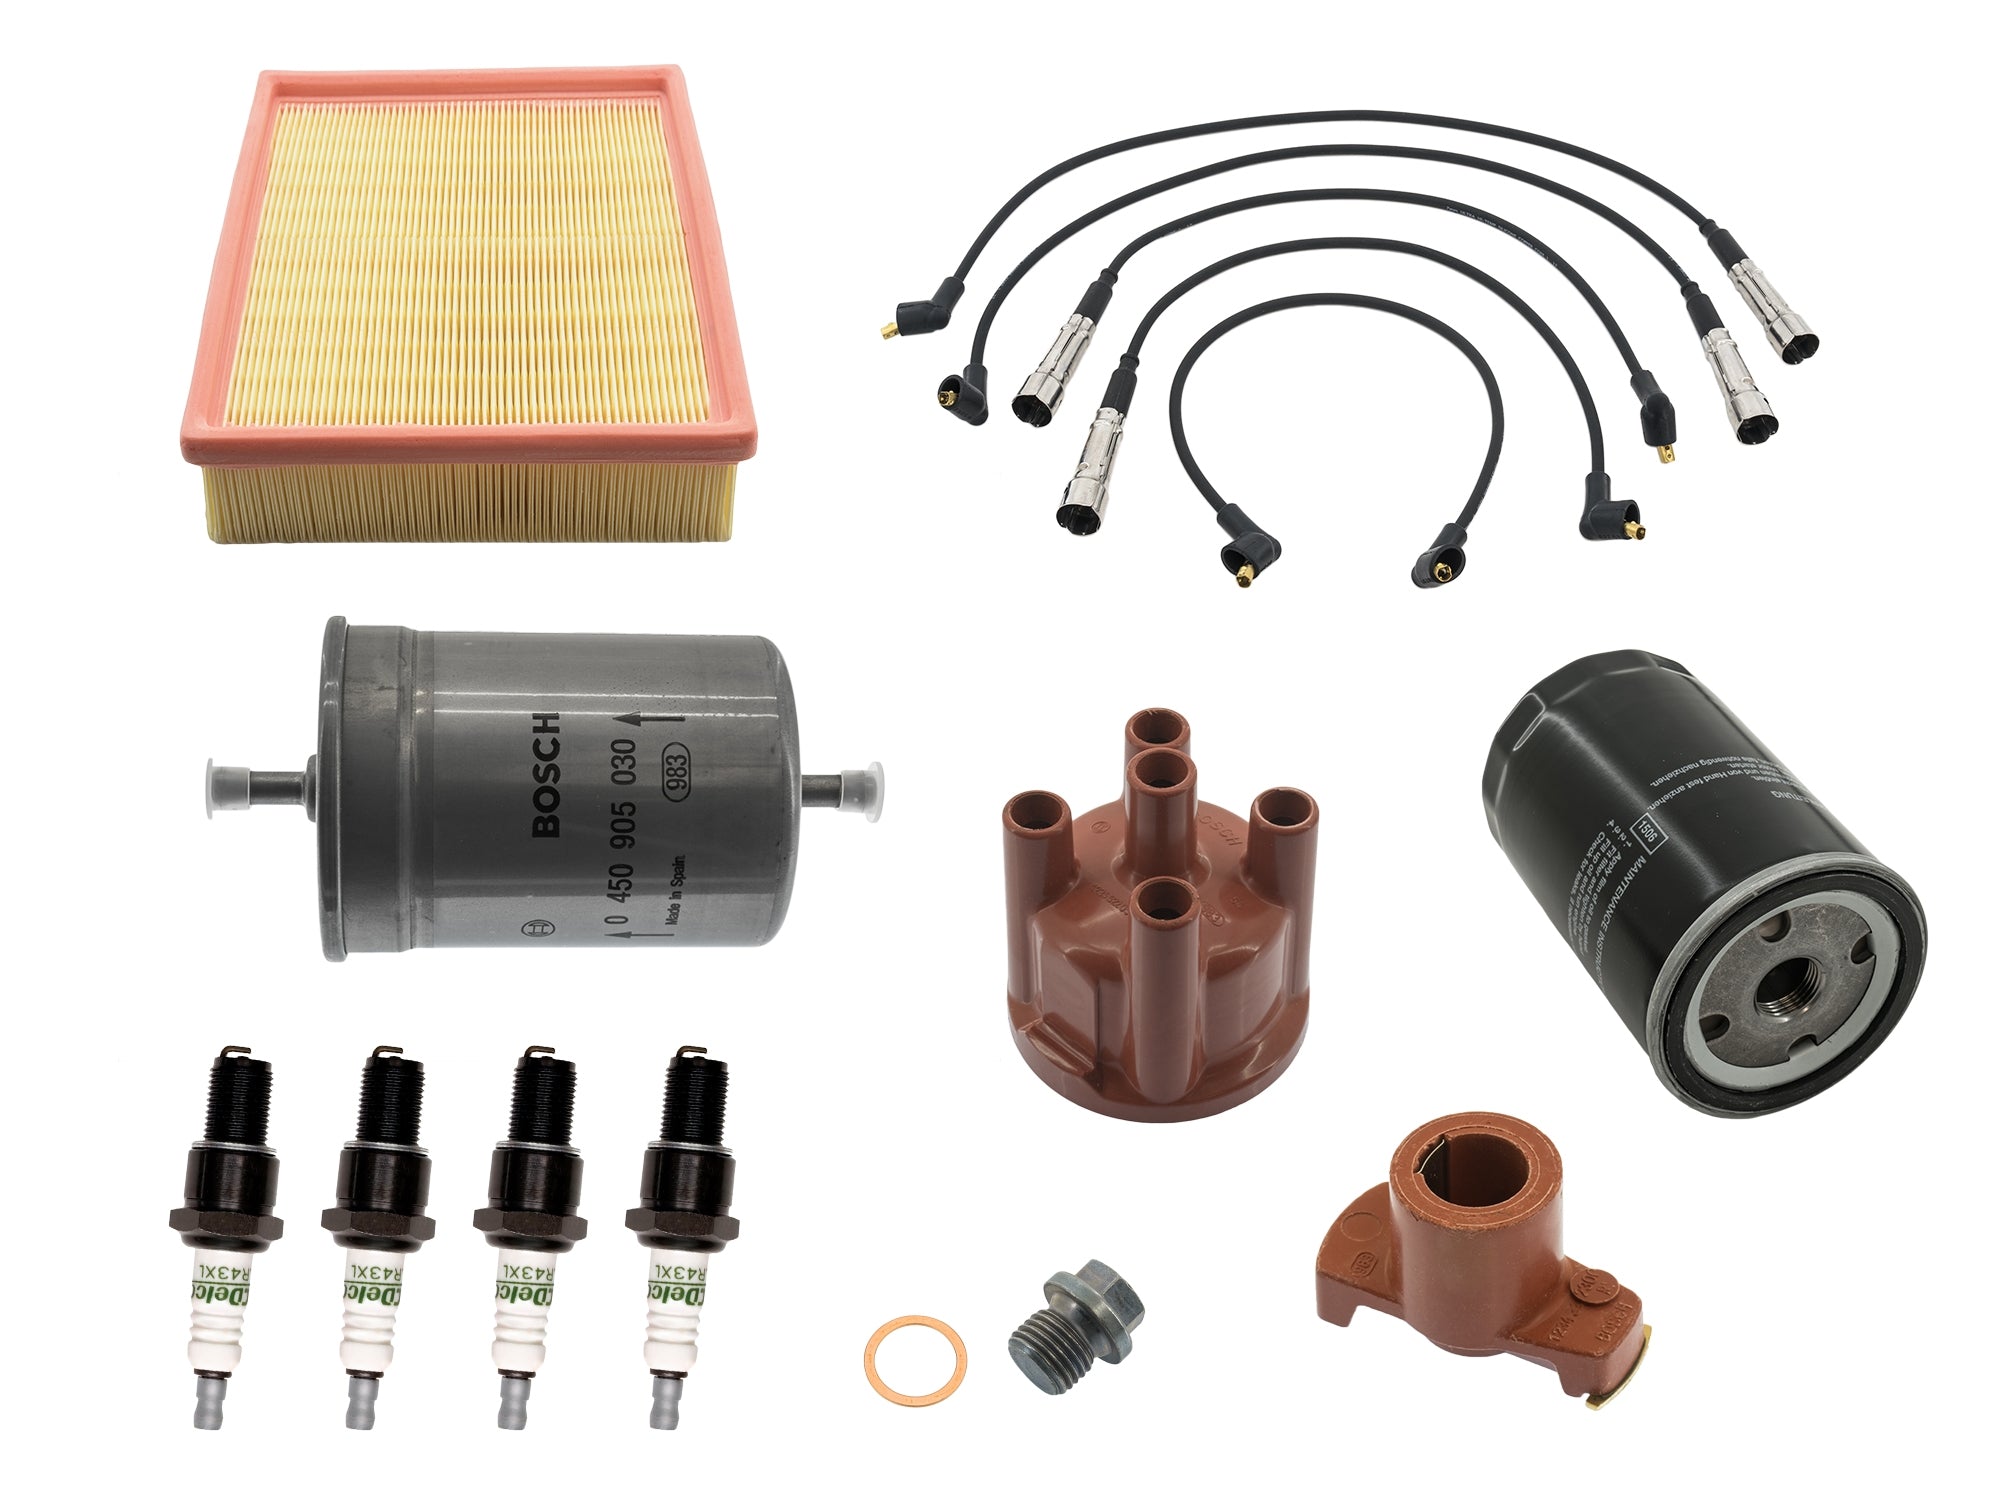 Lpg adapter kit for bus – GoWesty